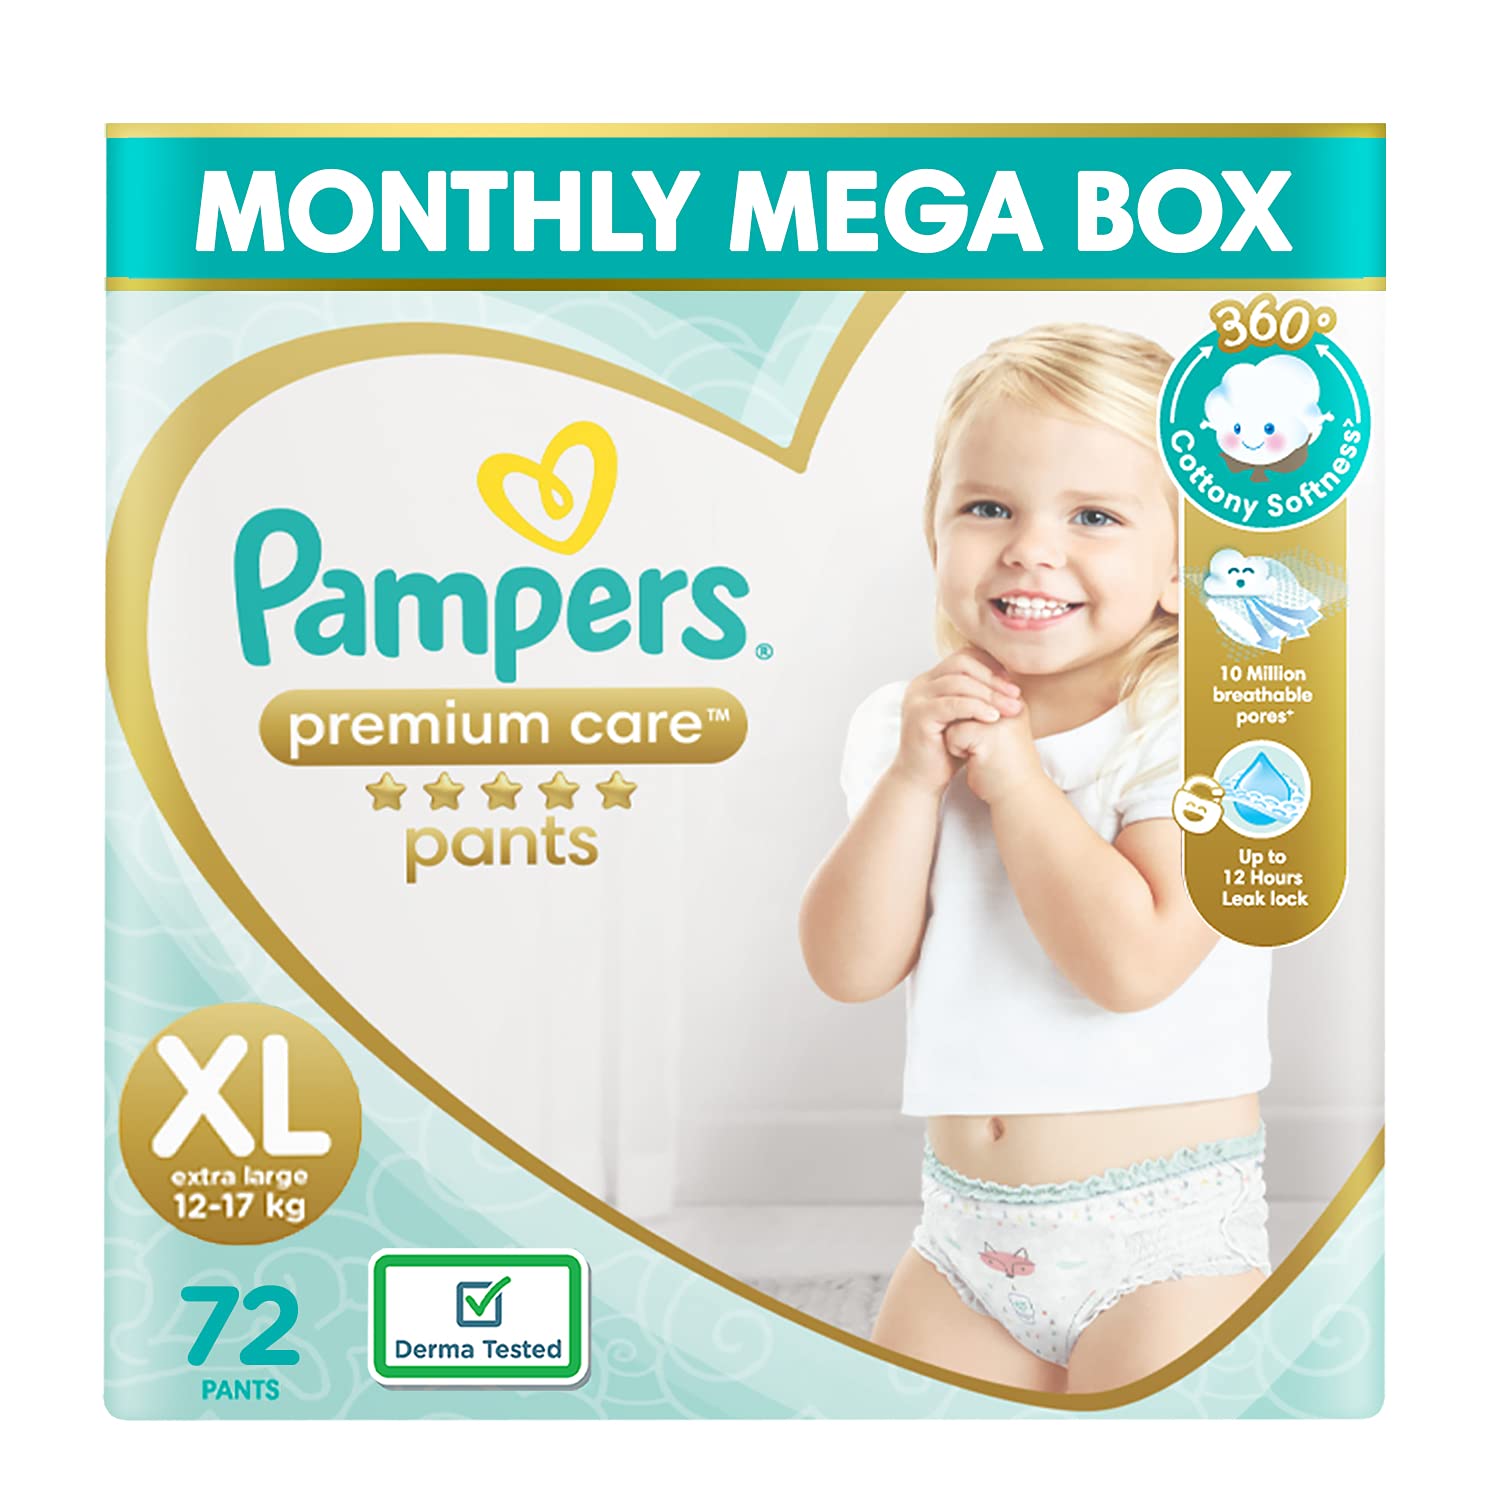 Pampers Premium Care Pants Diapers Monthly Mega Box Pack (XL) - (72 Pieces)